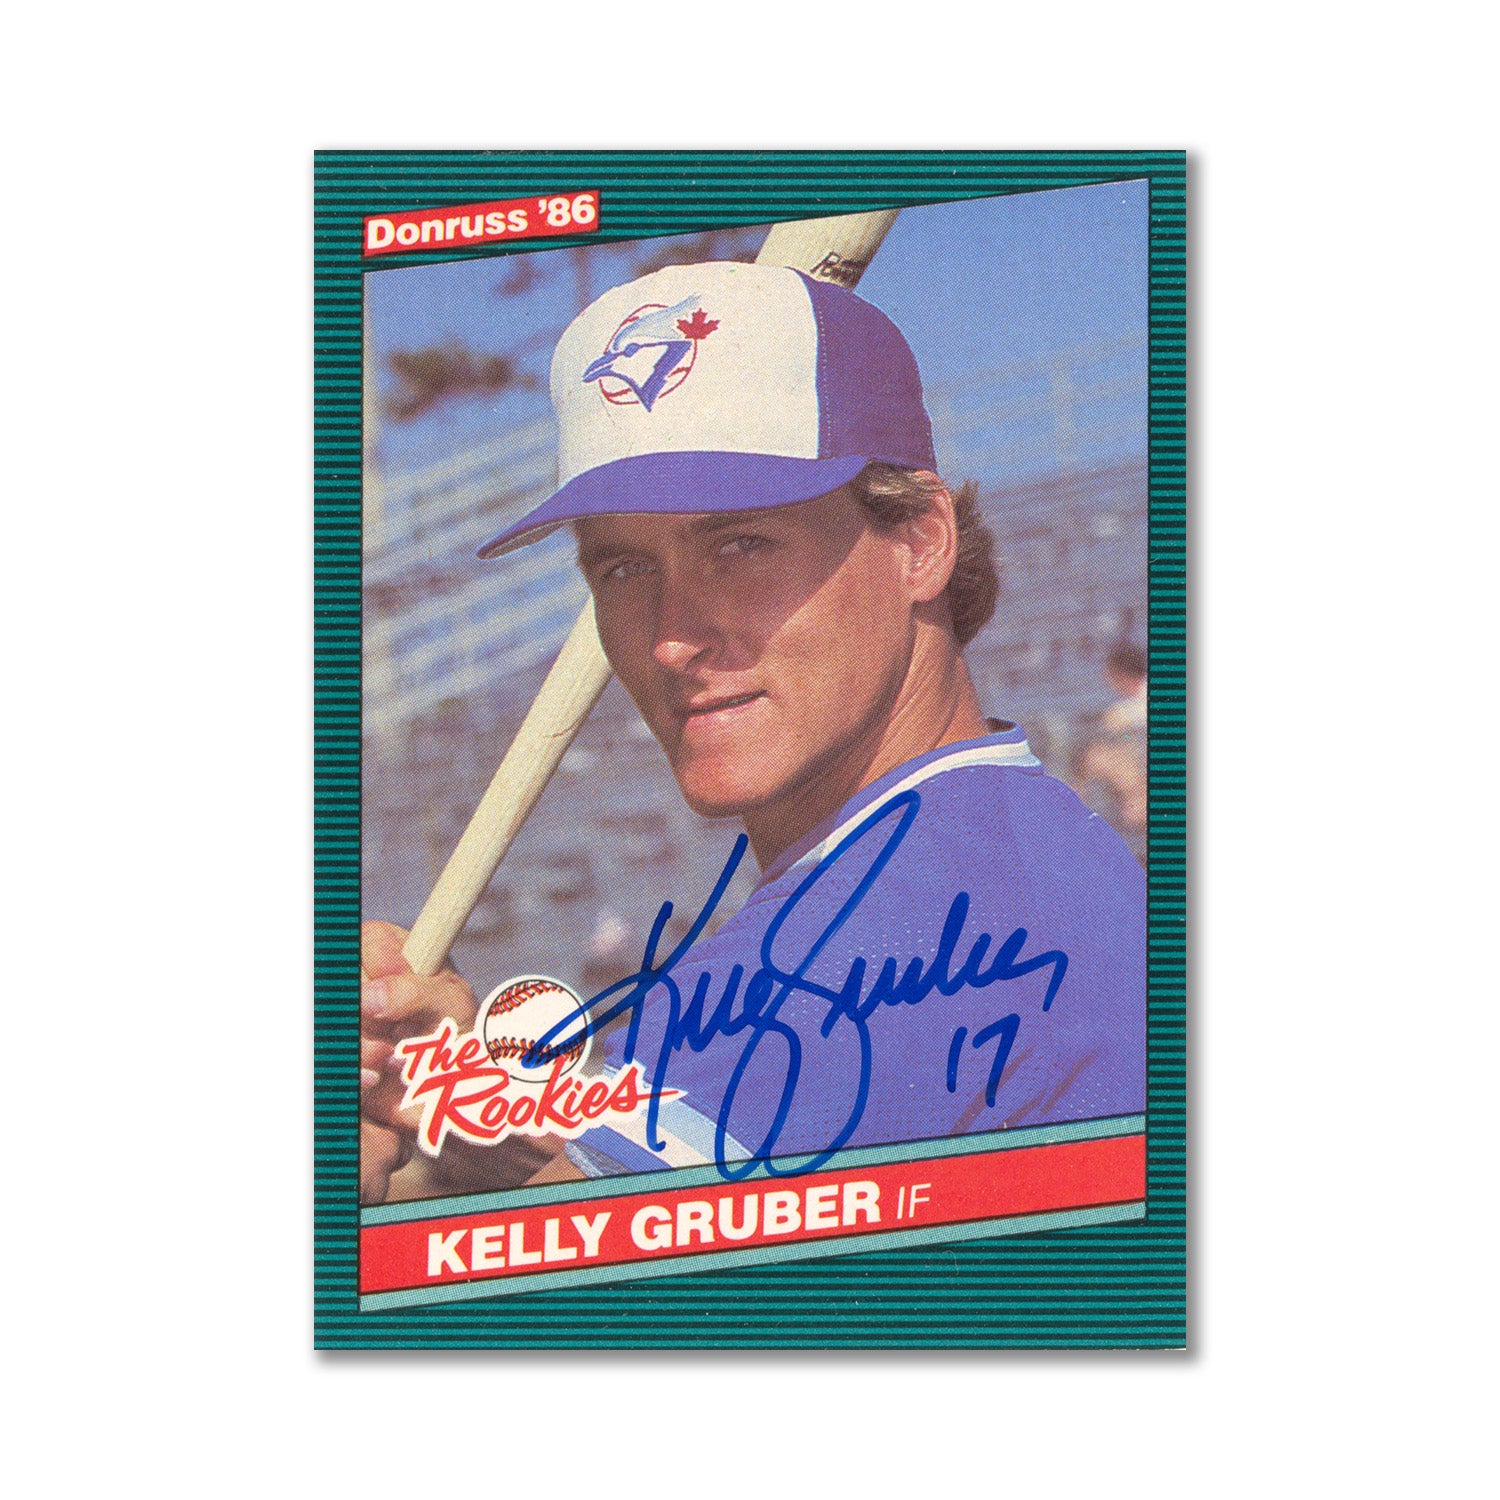 Autographed 1986 Donruss #16 Kelly Gruber Rookie Card